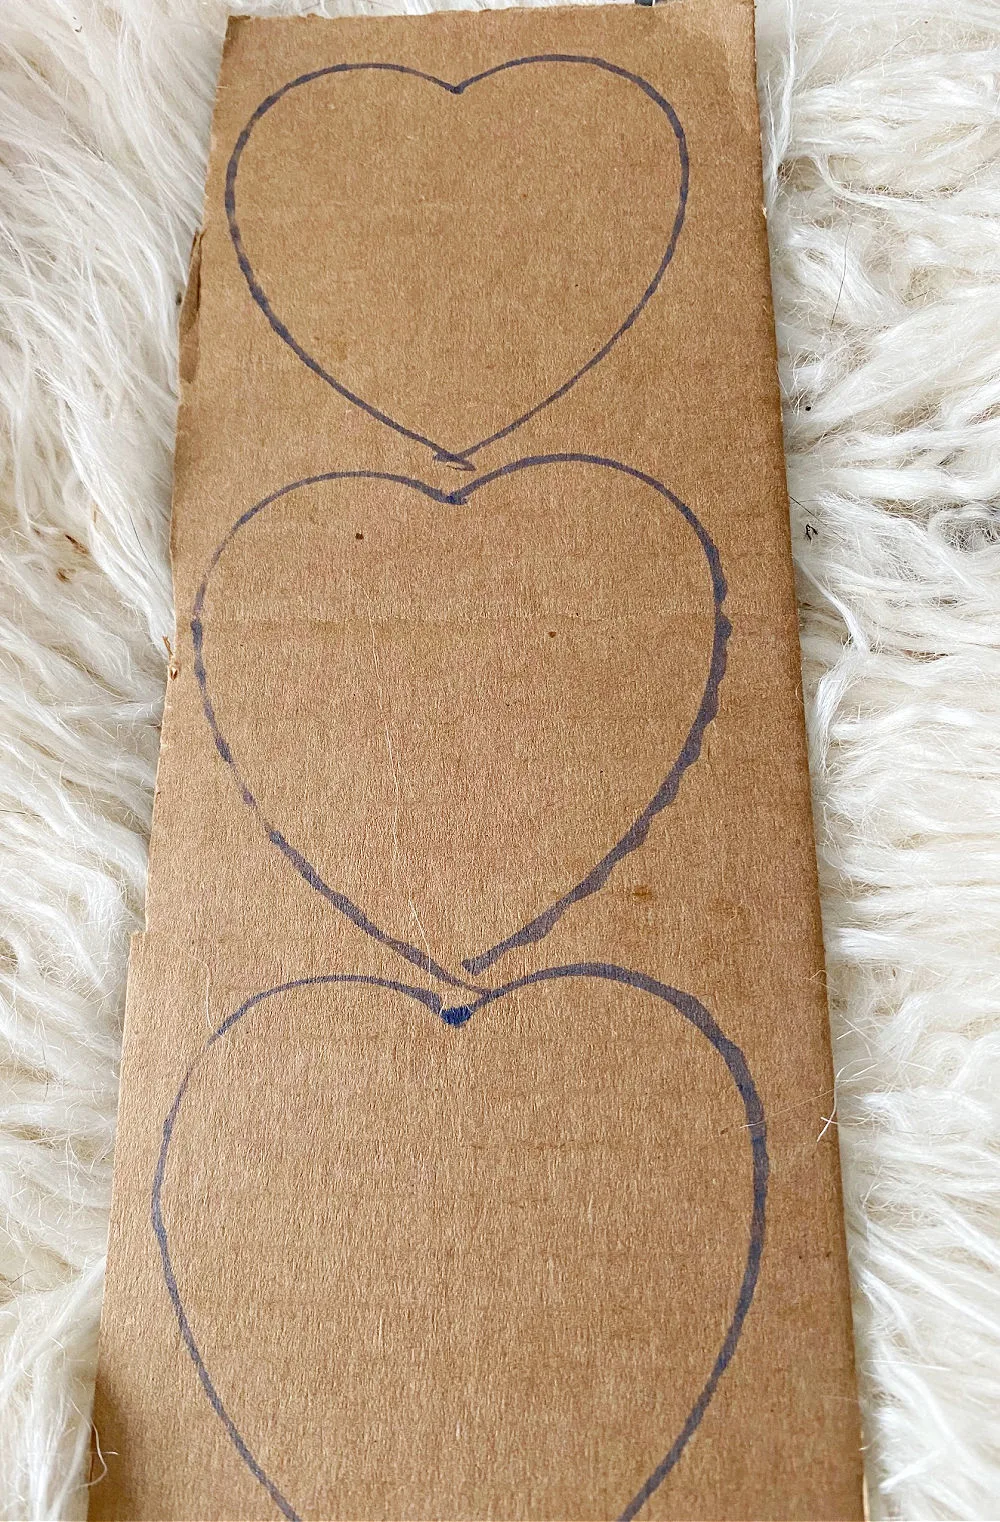 heart shapes traced on cardboard